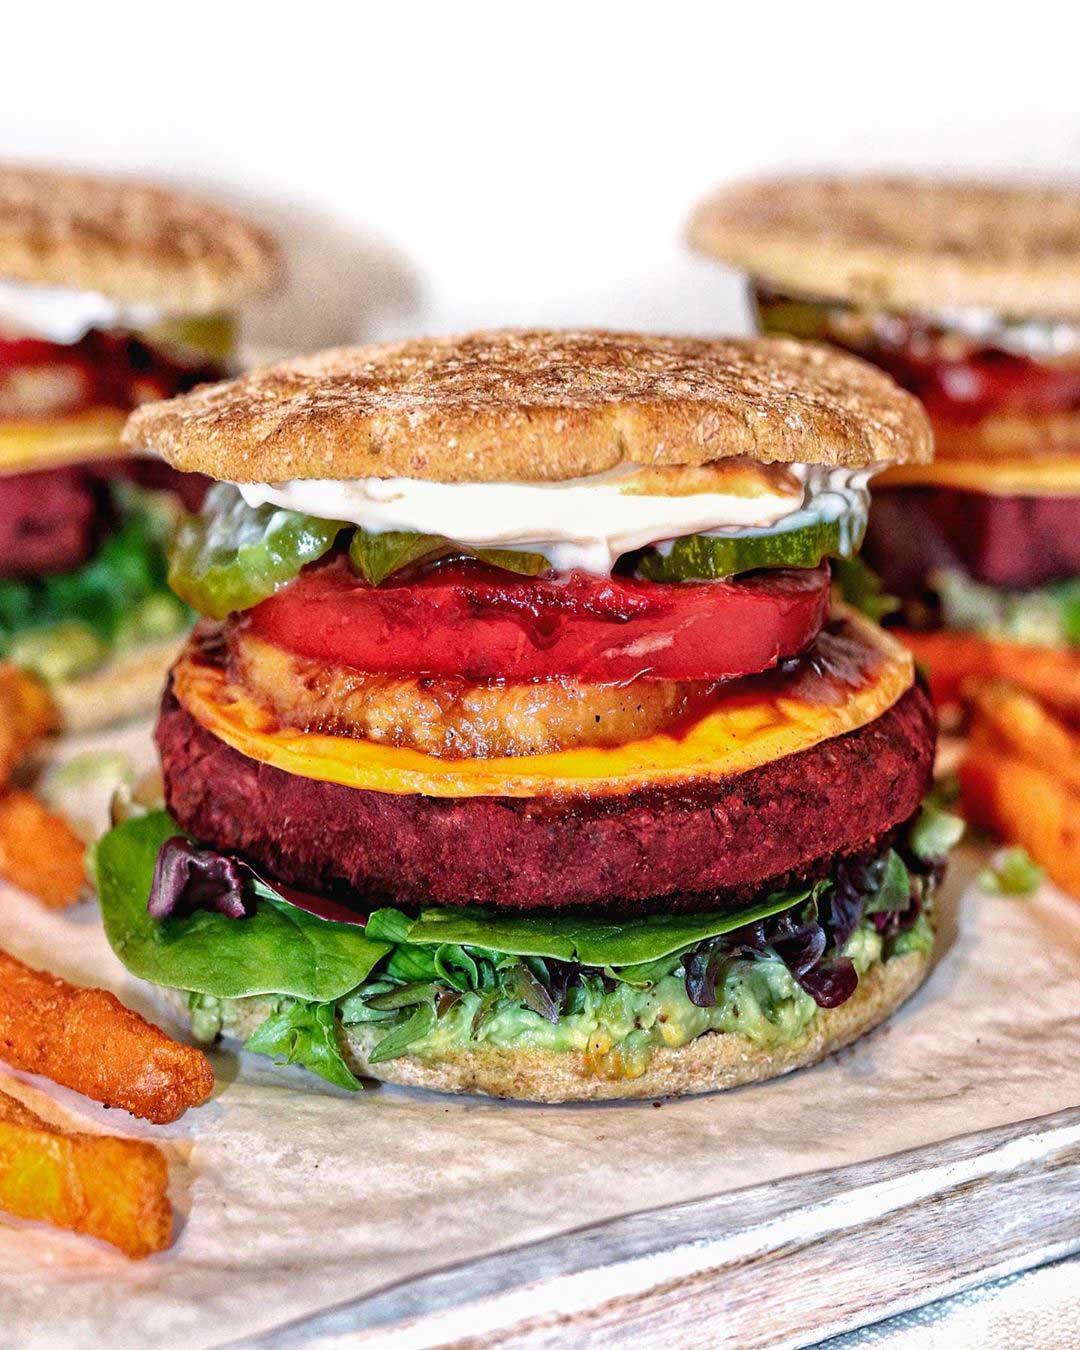 Roasted Beetroot Bean Burger recipe served on a plate with fries.